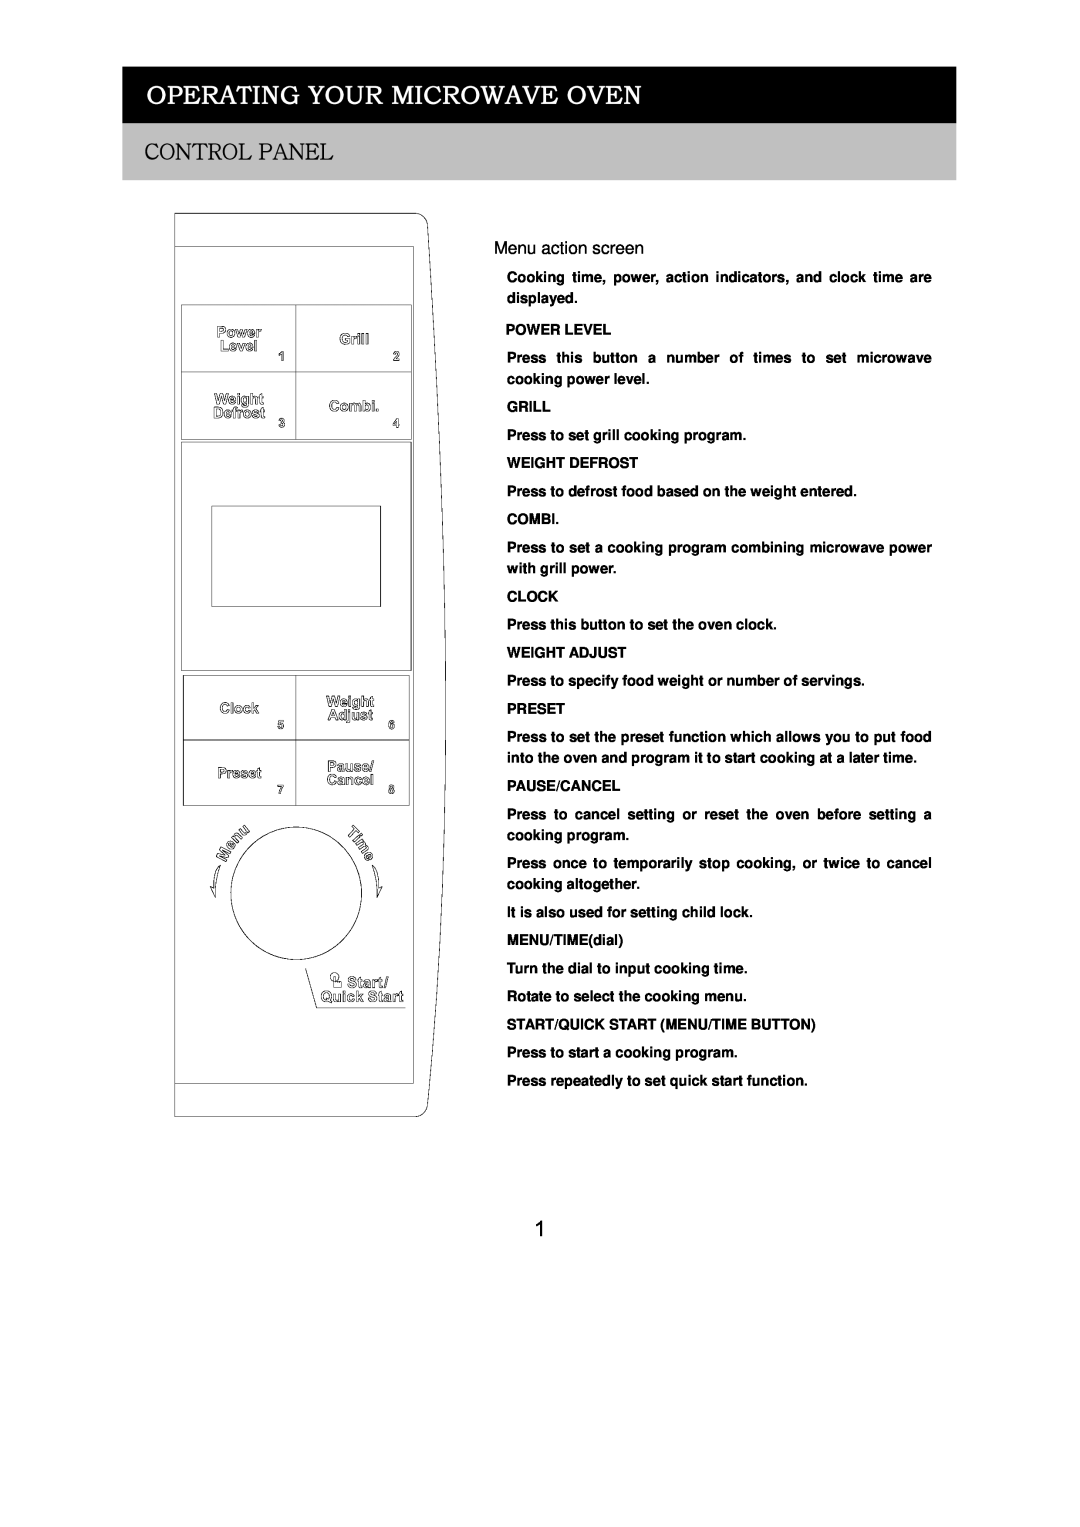 Russell Hobbs RHM2018 user manual Operating Your Microwave Oven, Control Panel, Menu action screen 